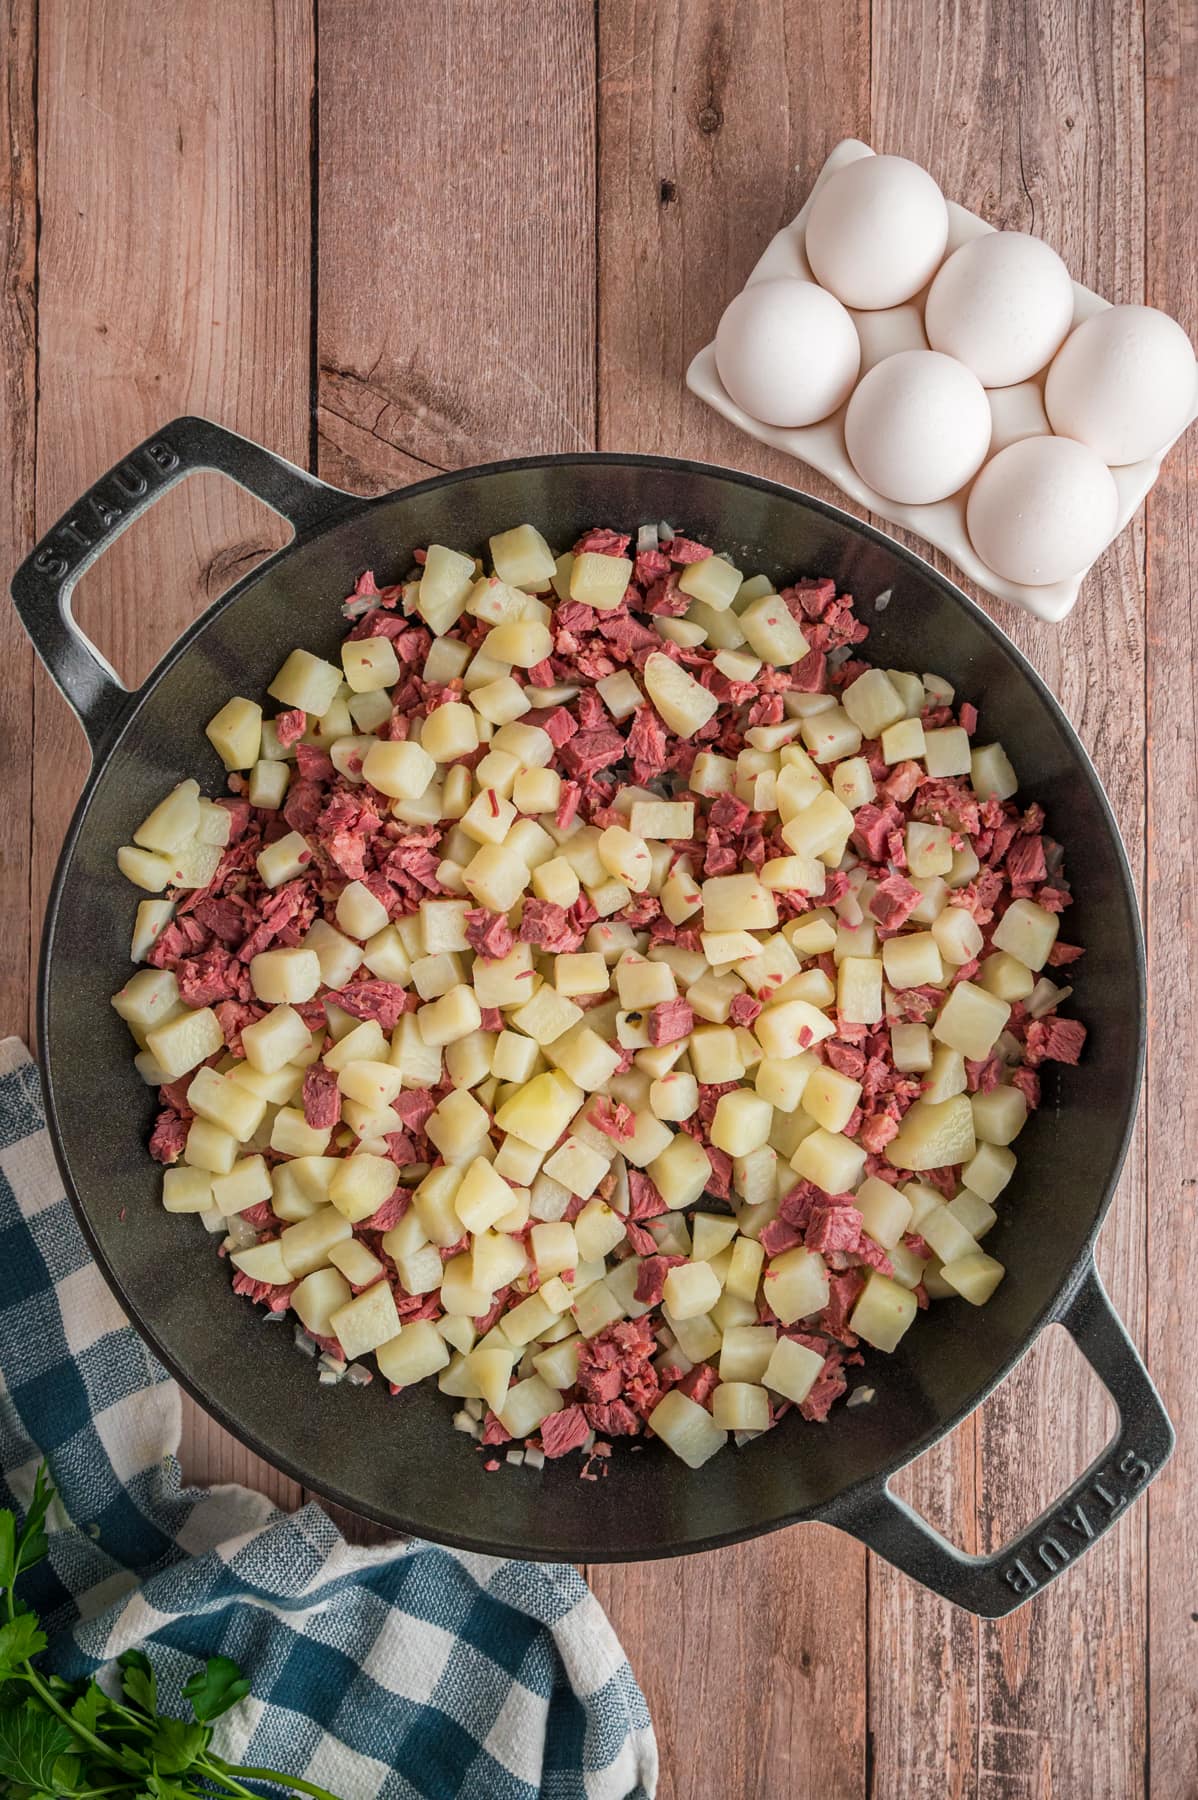 Diced potatoes and corned beef in a cast iron skillet.